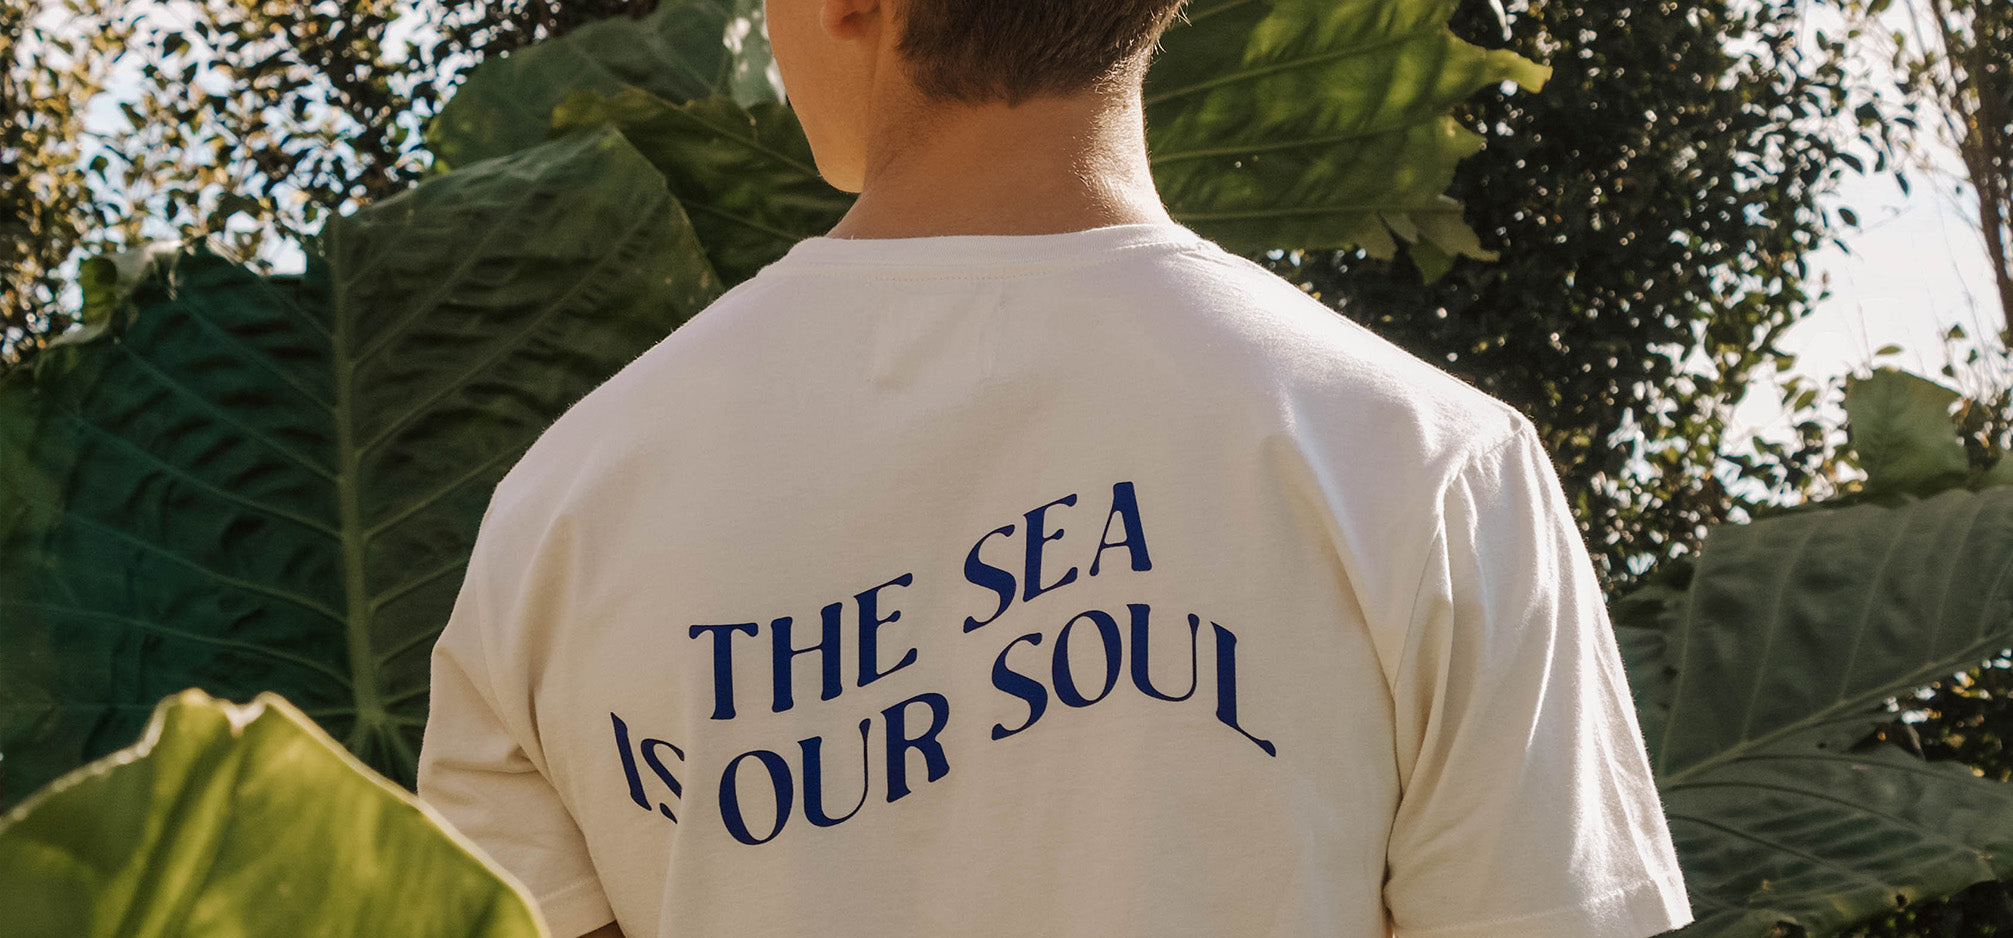 Image of man wearing white t-shirt saying the sea is our soul